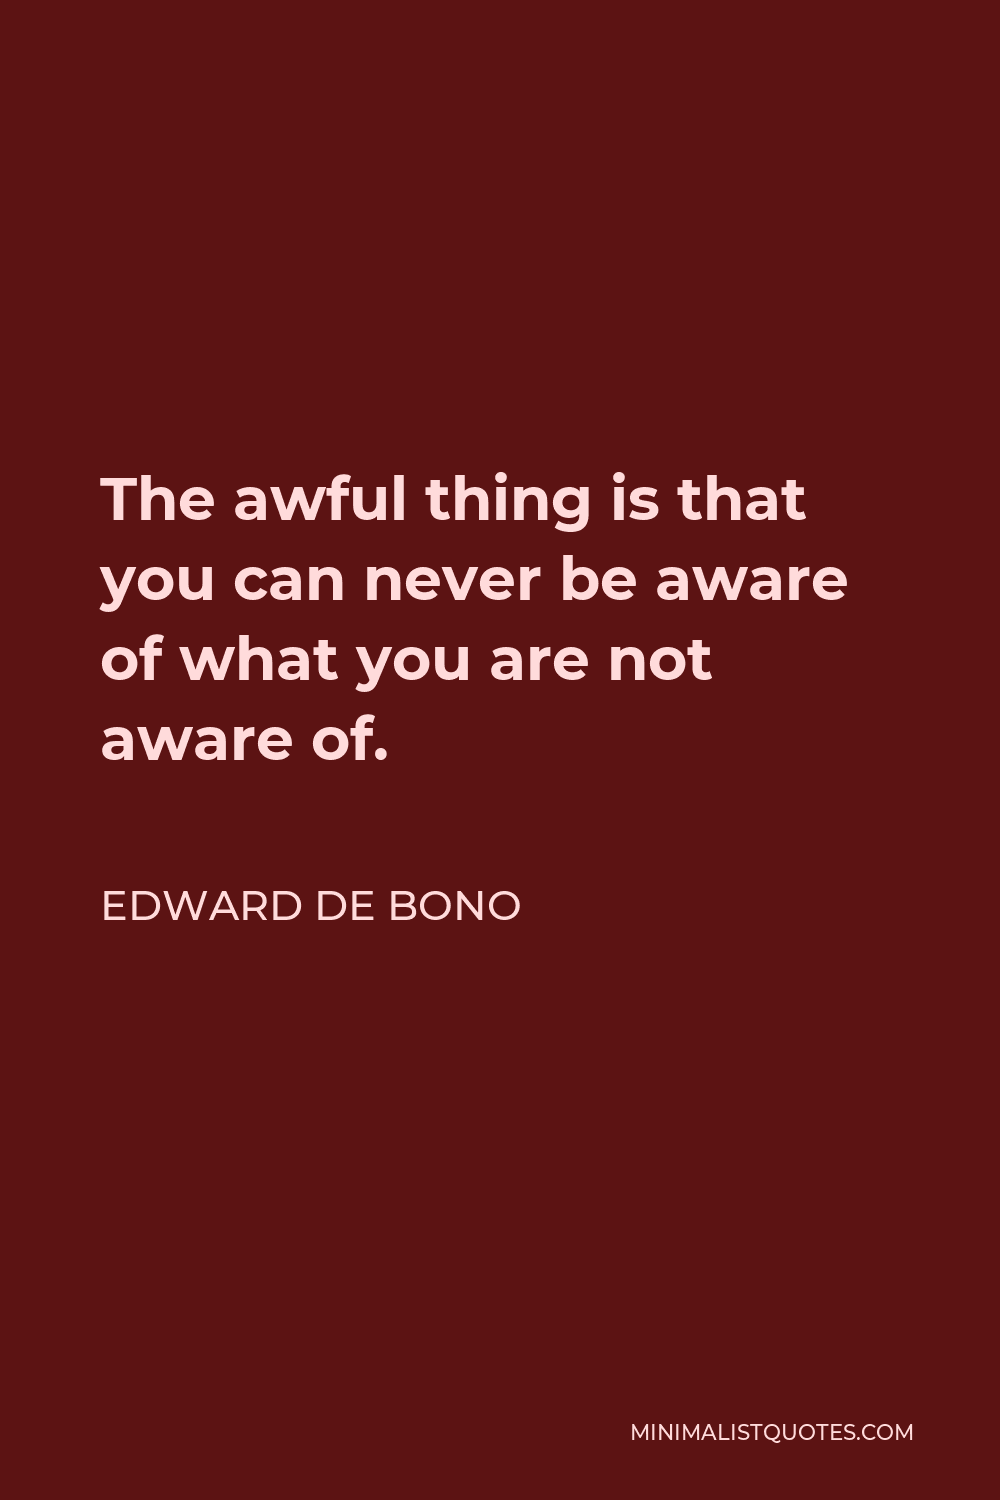 Edward de Bono Quote - The awful thing is that you can never be aware of what you are not aware of.